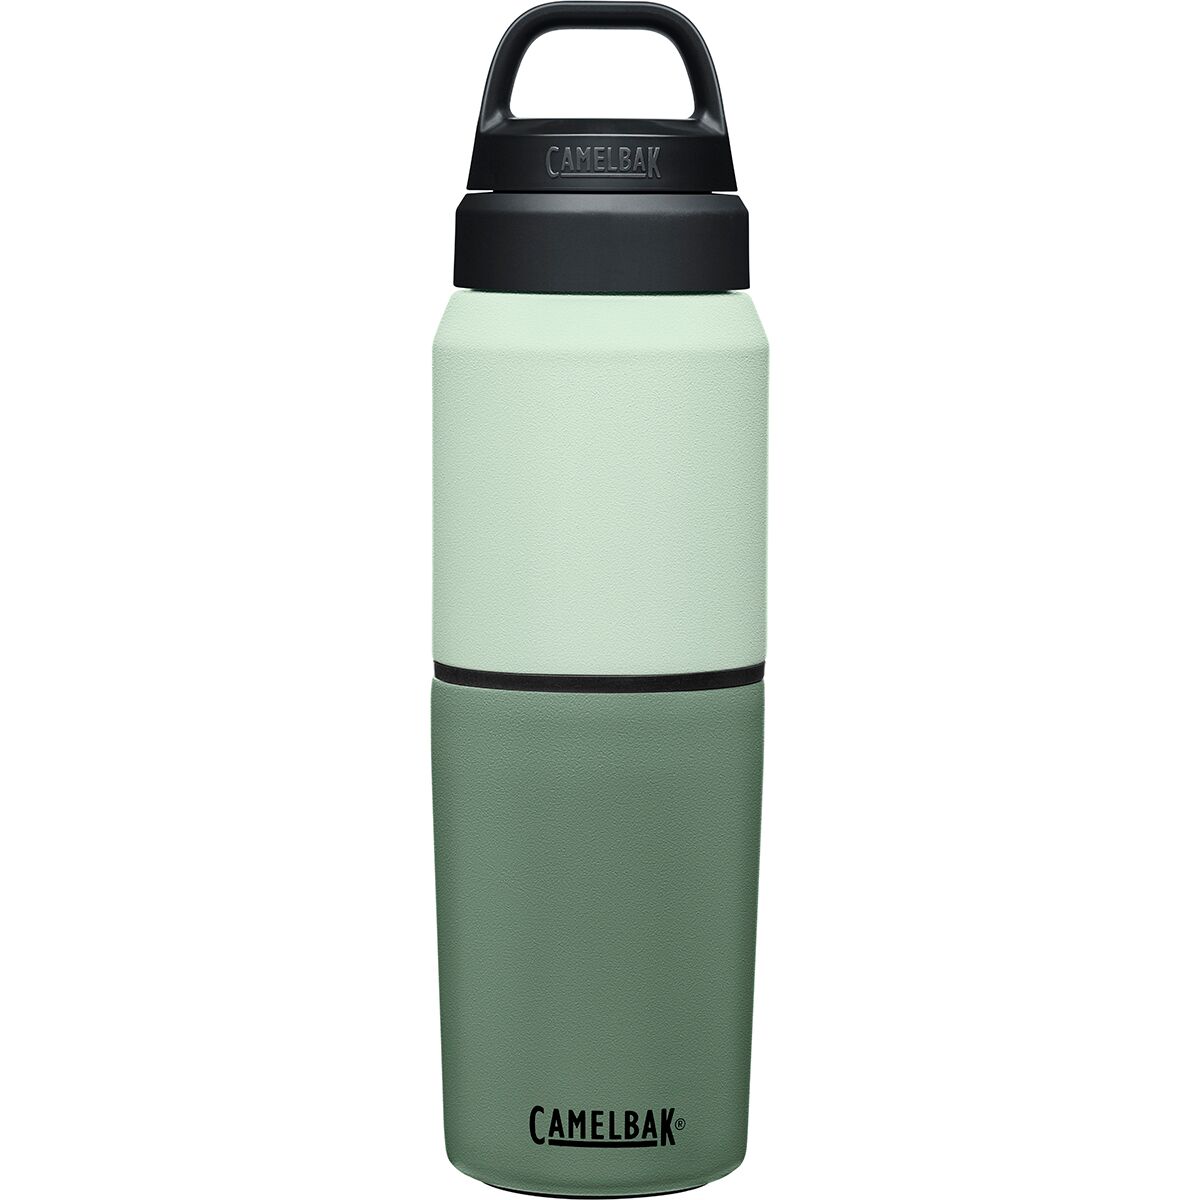 Photos - Thermos CamelBak MultiBev Stainless Steel Vacuum Insulated 17oz/12oz Cup 